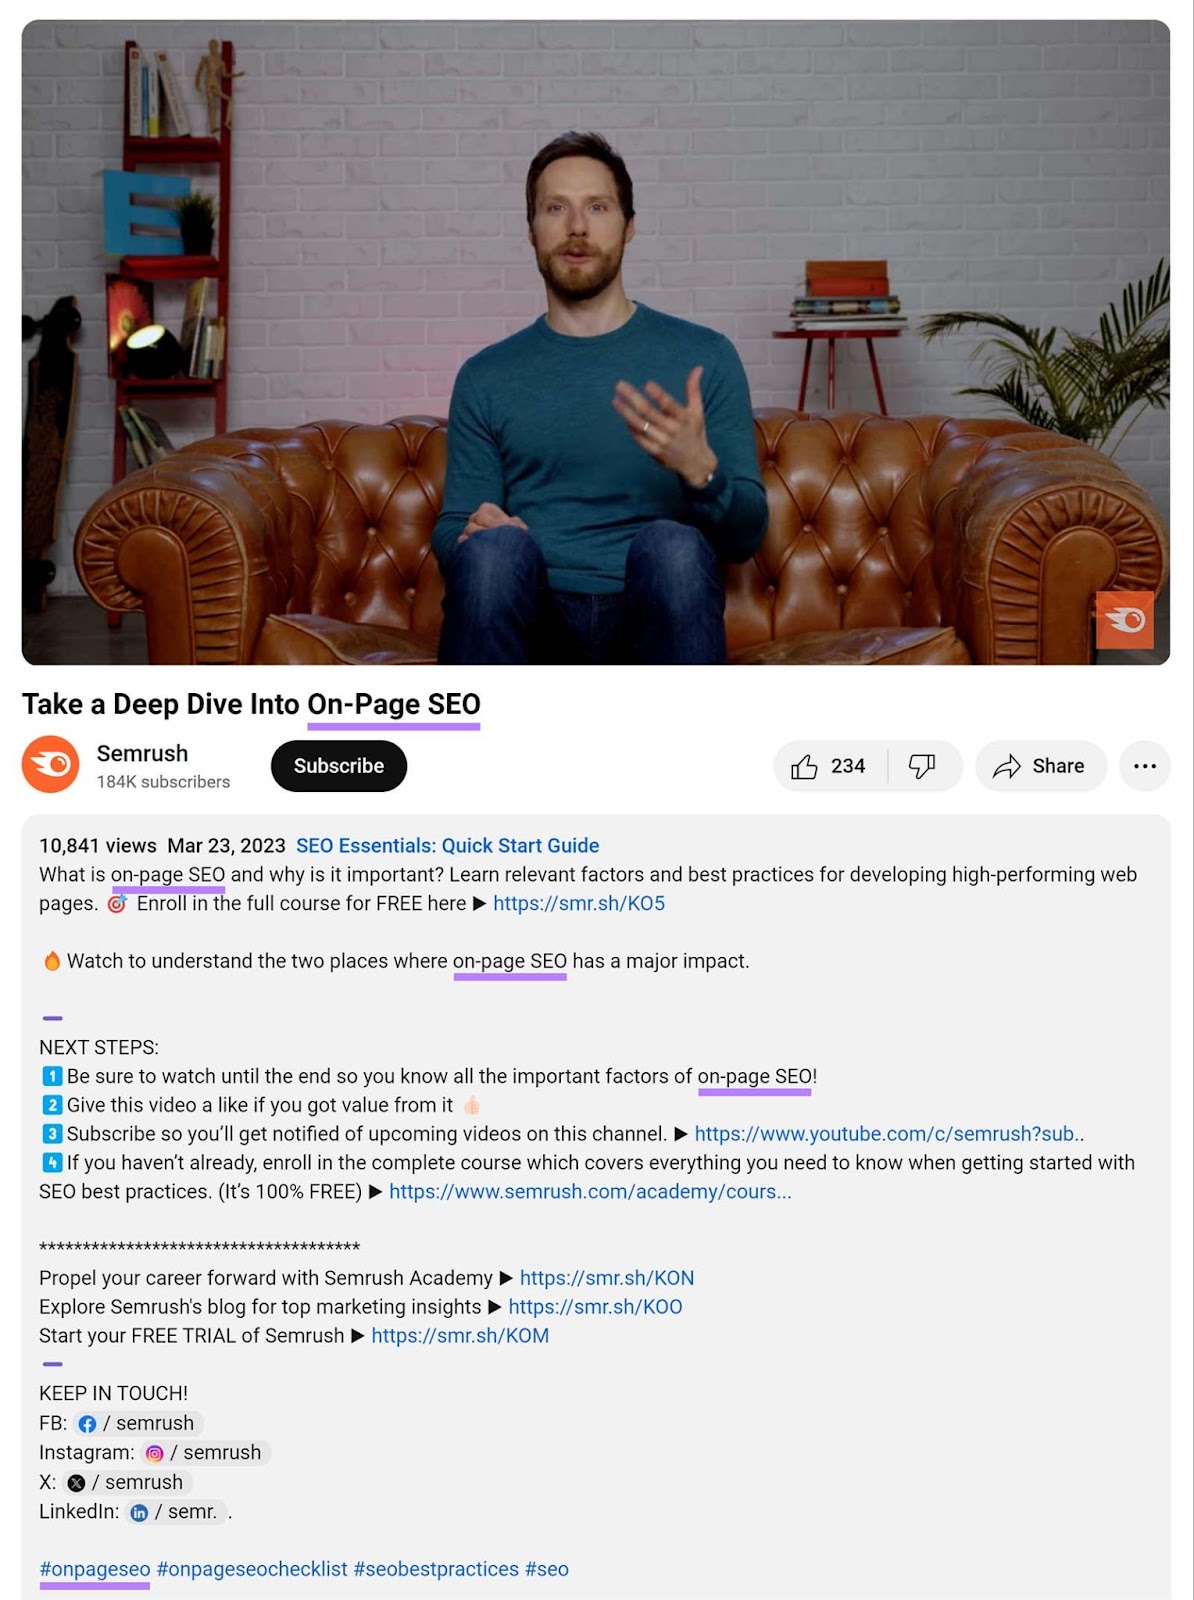 Semrush 'Take a Deep Dive Into On-Page SEO' YouTube video with keywords highlighted.